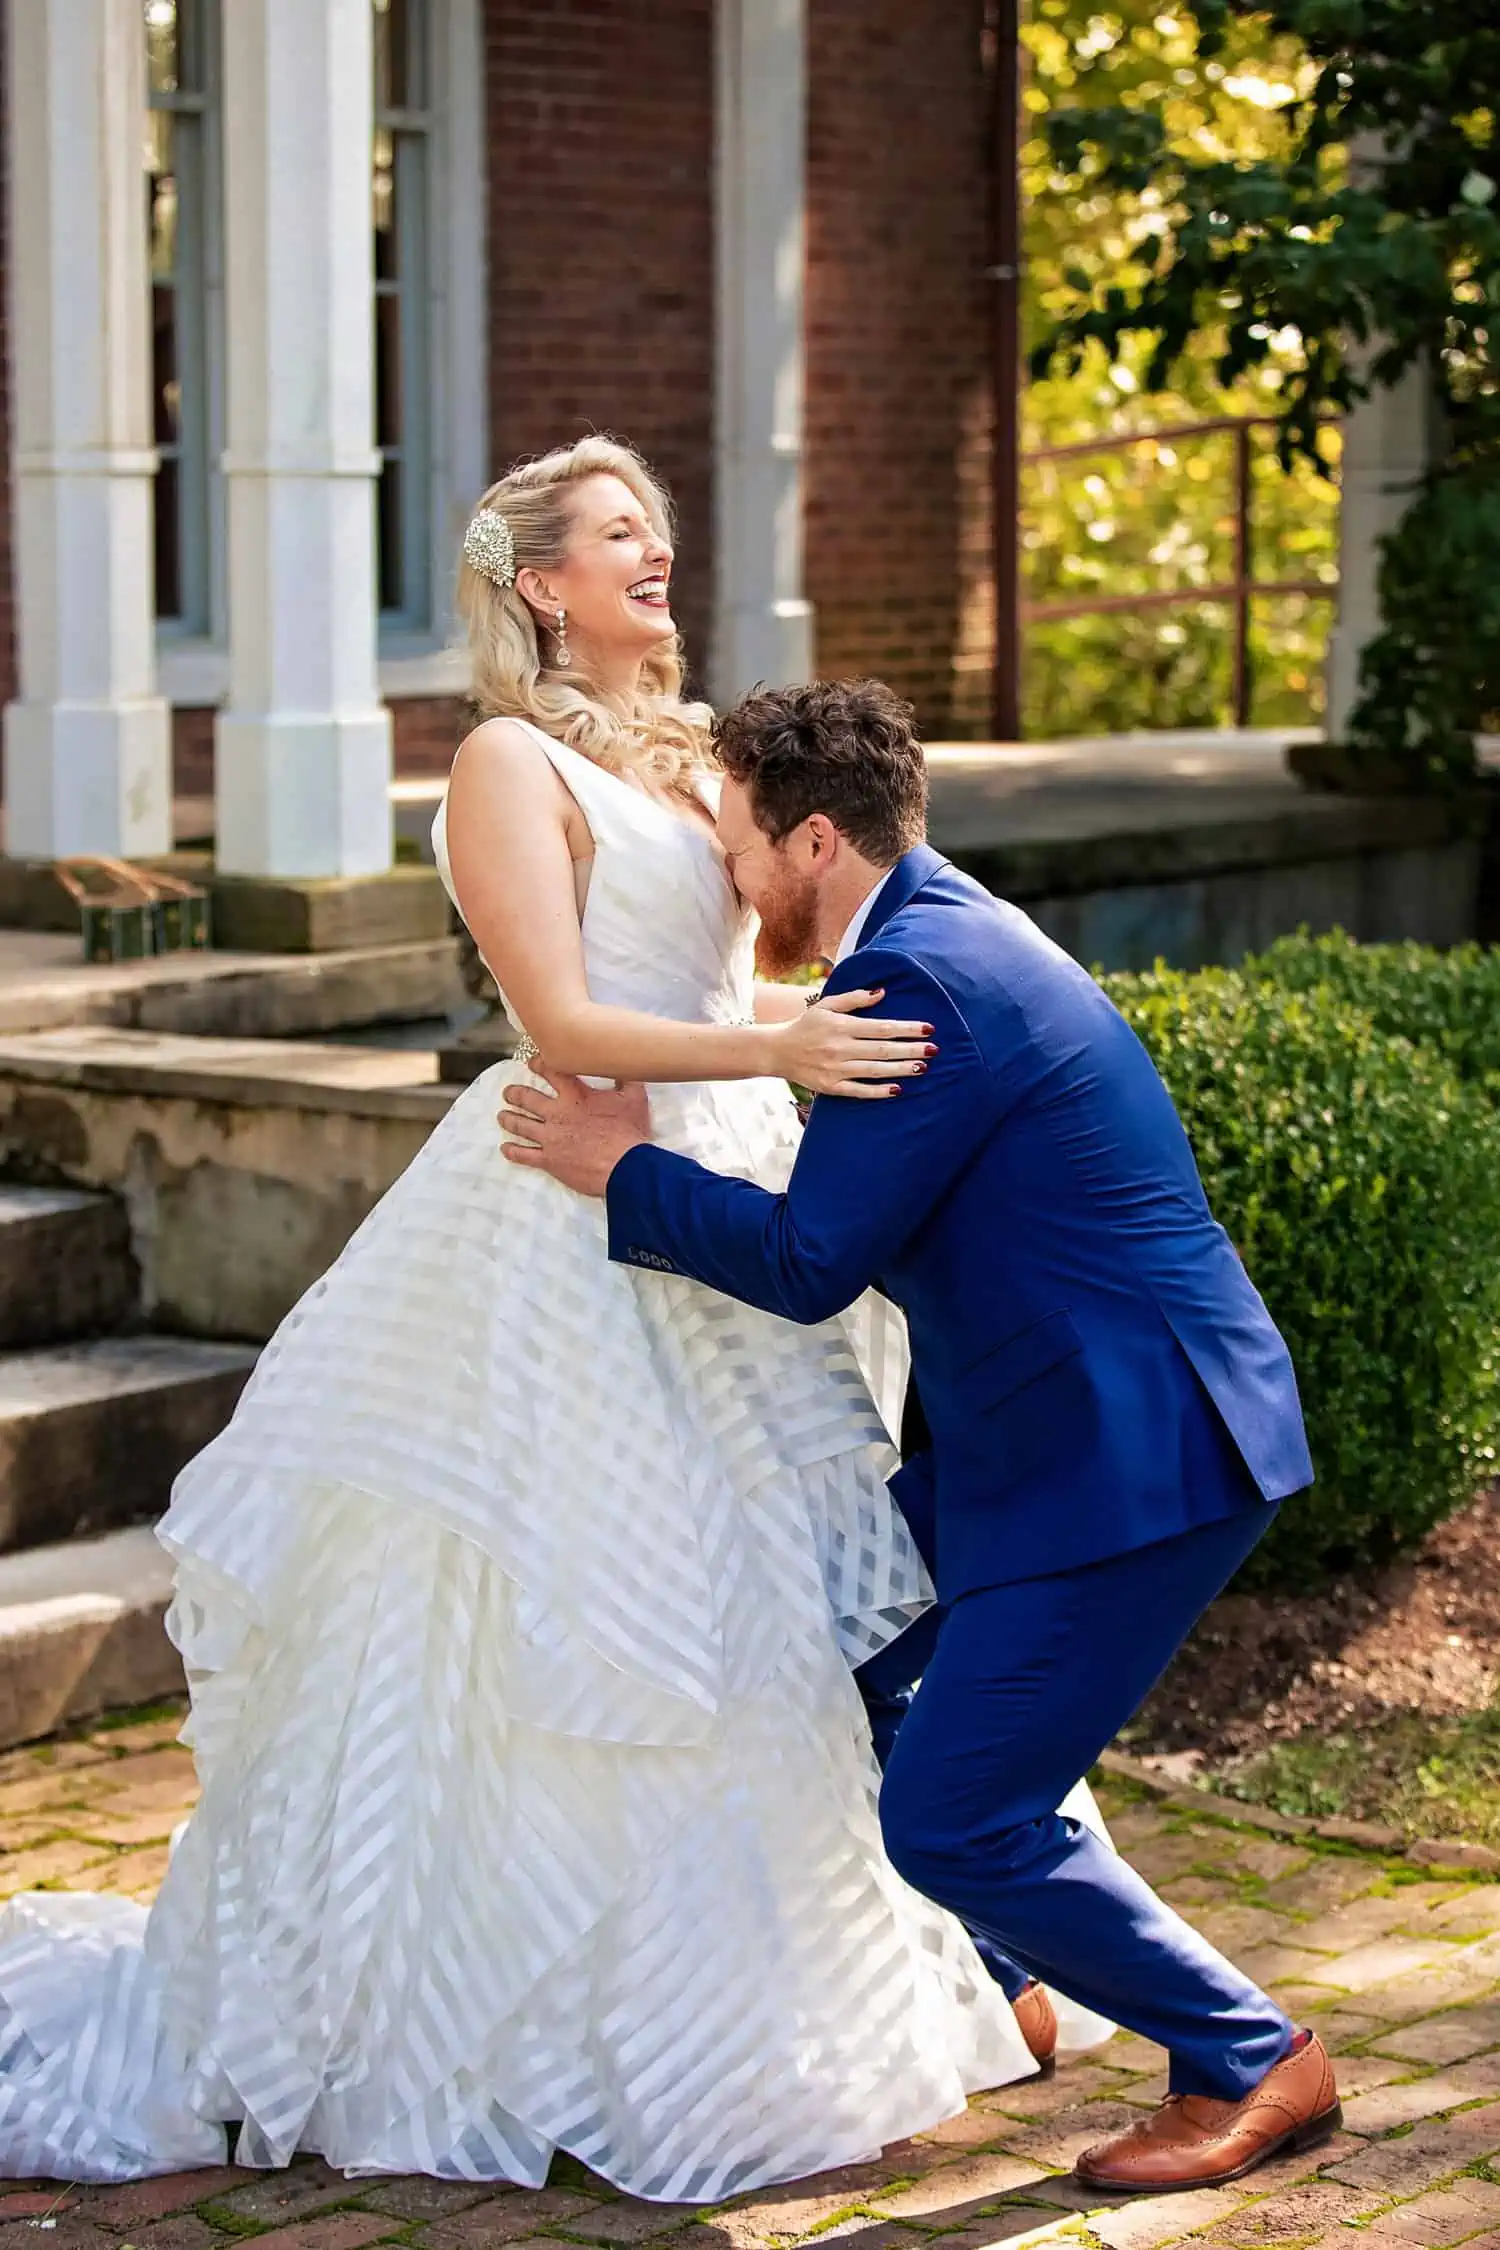 A bride and groom kissing in front of a brick house.